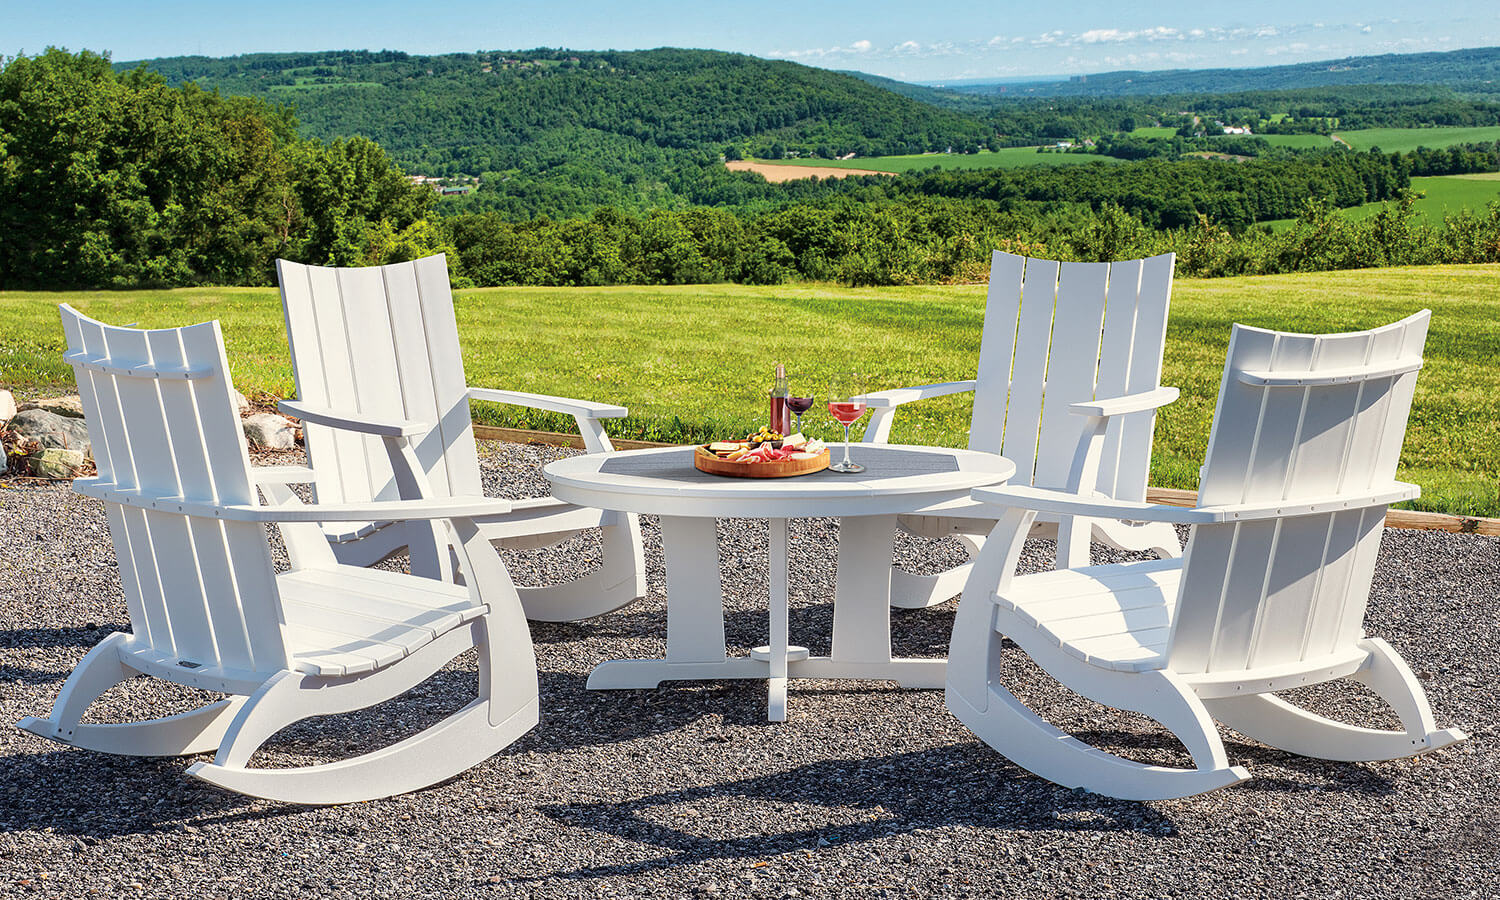 EC Woods Port Royal Outdoor Poly Chat Table with Liberty Rockers Shown in Dark Gray and Bright White